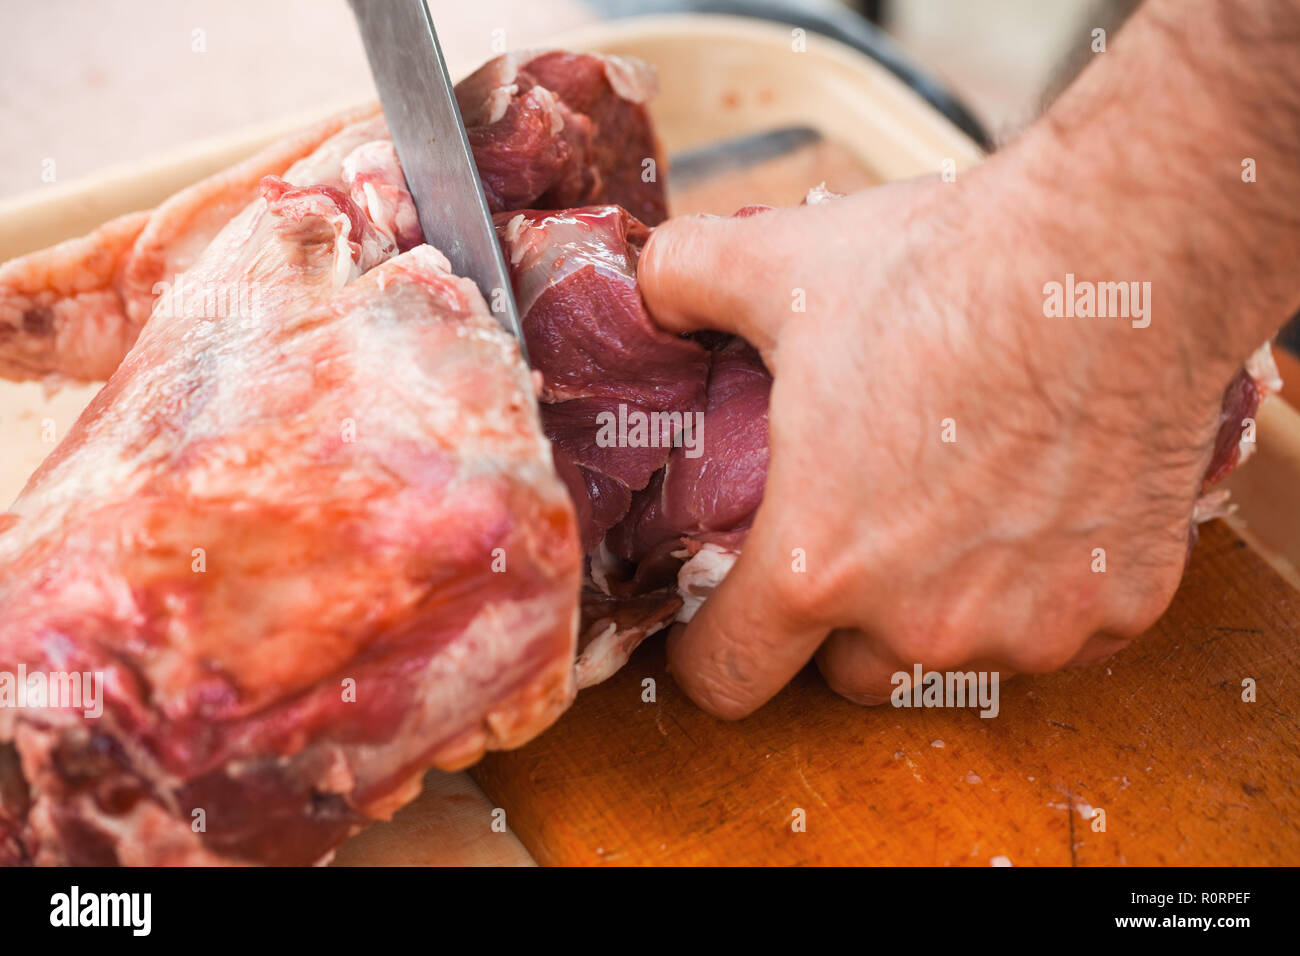 Lamb cutting, cook hands with knife, close-up photo, selective focus Stock Photo